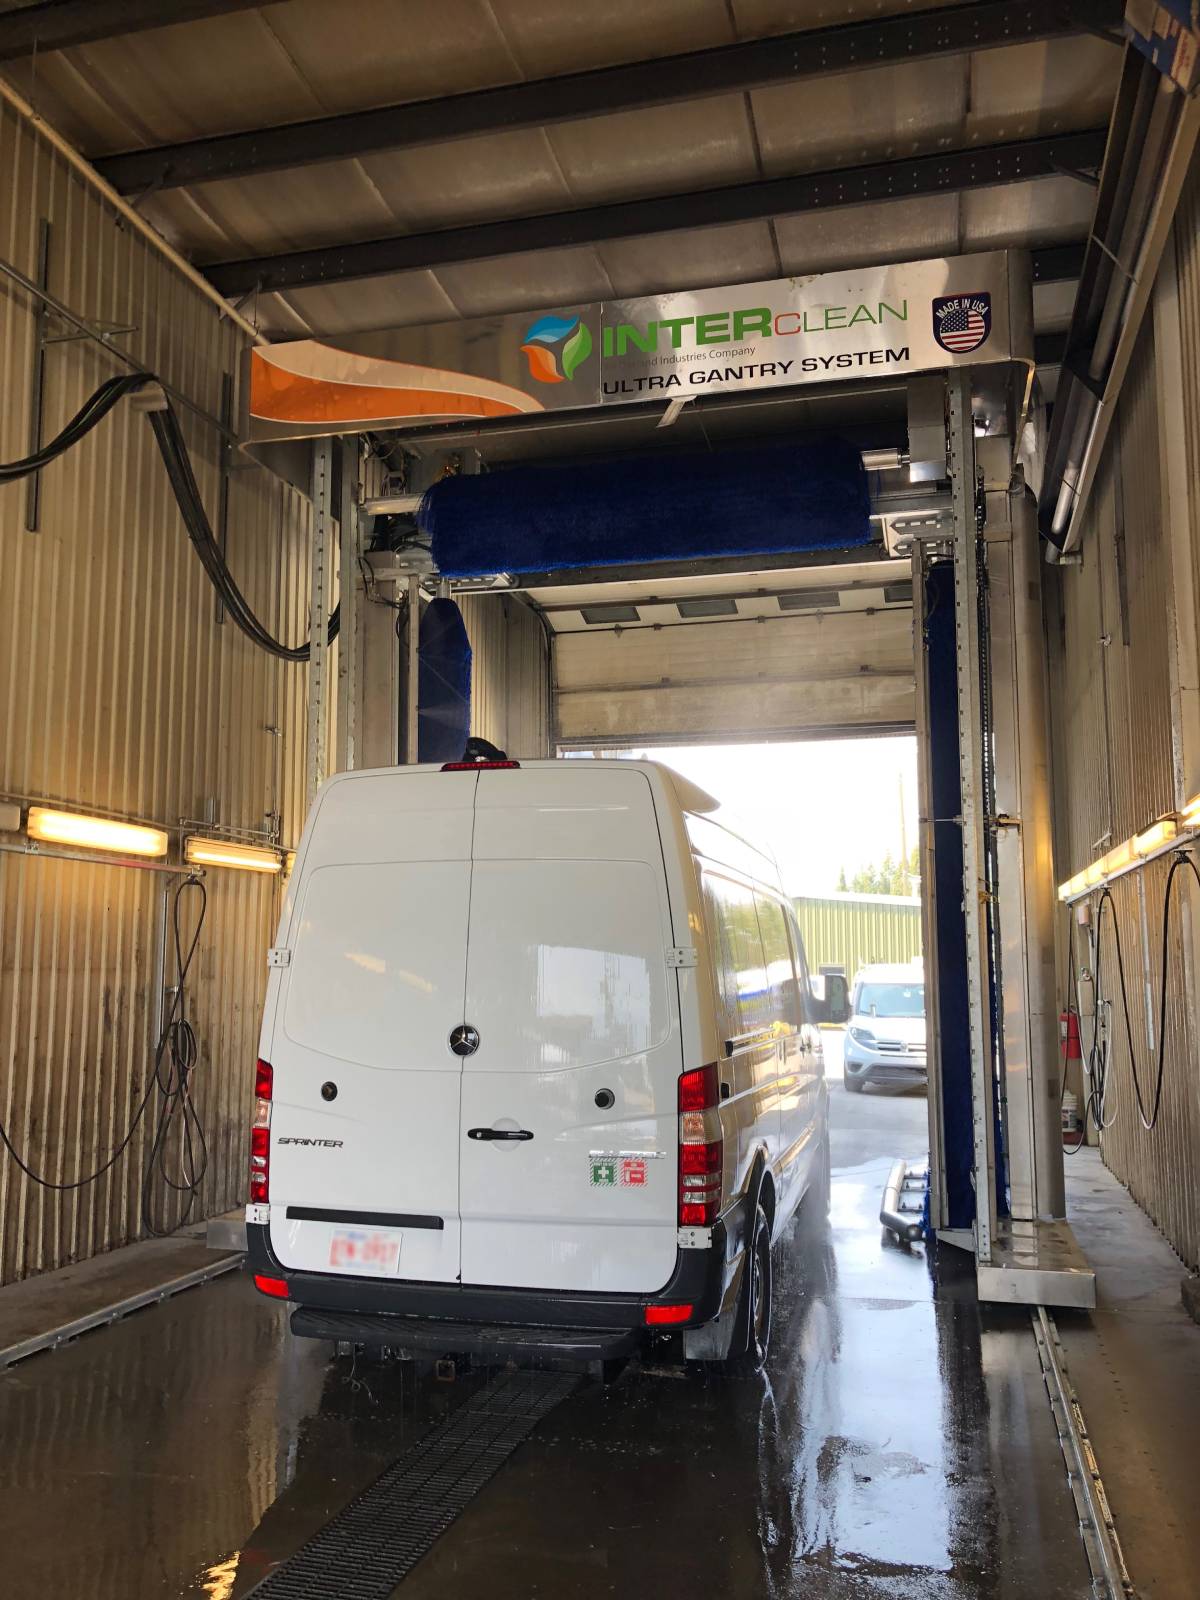 White van being cleaned by ultra gantry wash system